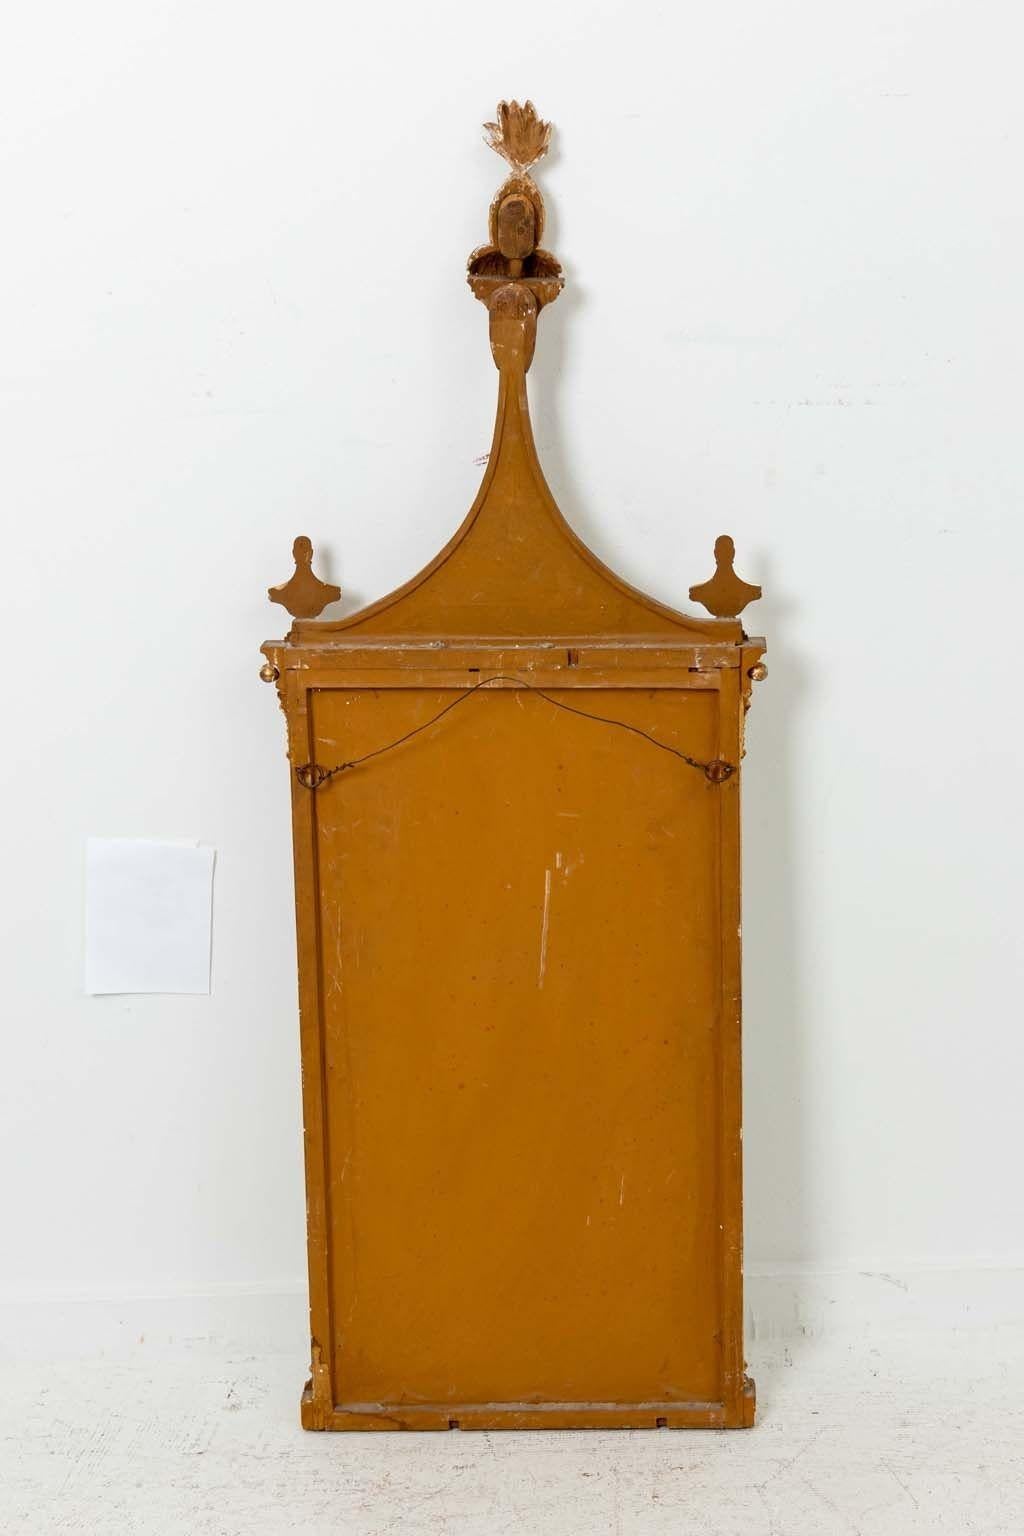 Federal Style Gilt Framed Mirror with Pineapple Finial, Early 20th C. American For Sale 3